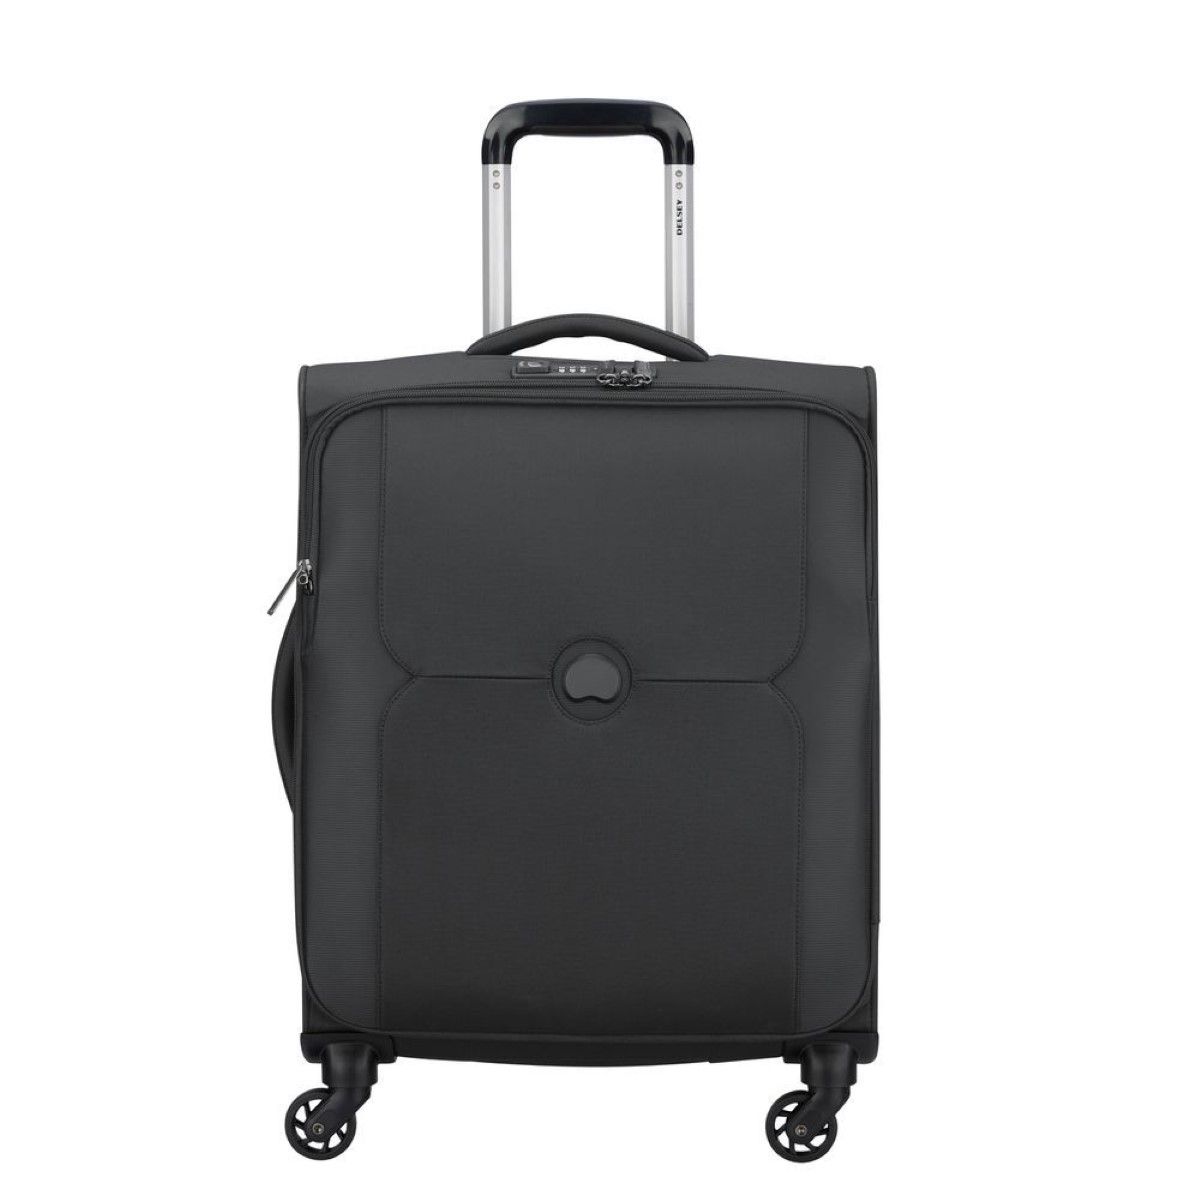 Mercure Slim Cabin Case 55 cm Delsey, light handluggage in durable fabric, with two silent wheels, double tube telescopic handle, TSA combination lock, front pocket, zipped compartment, and side handles.